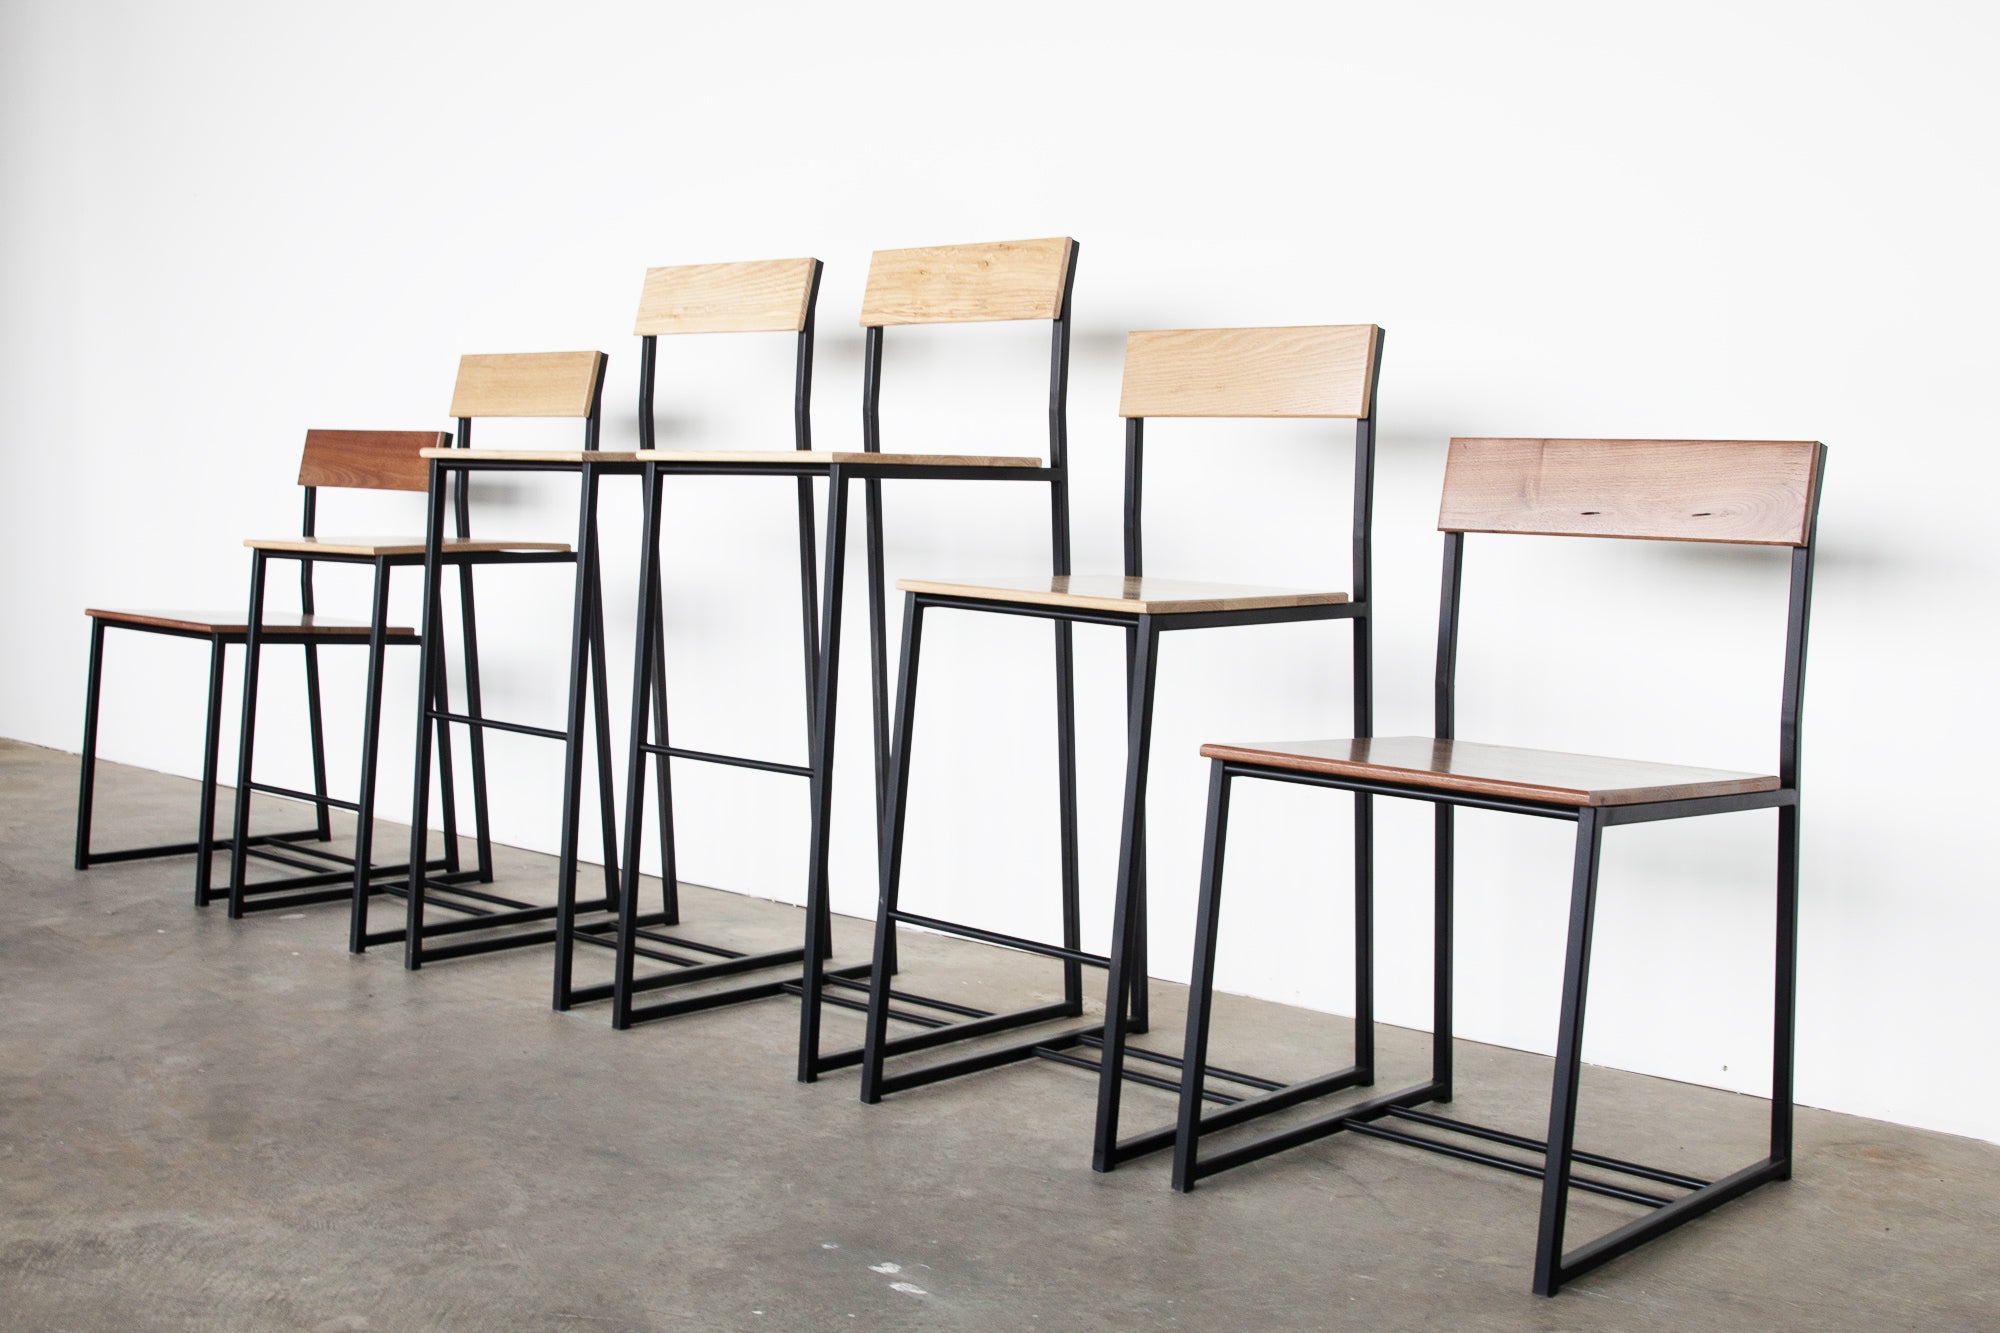 The Scout Seating Series by Edgework Creative